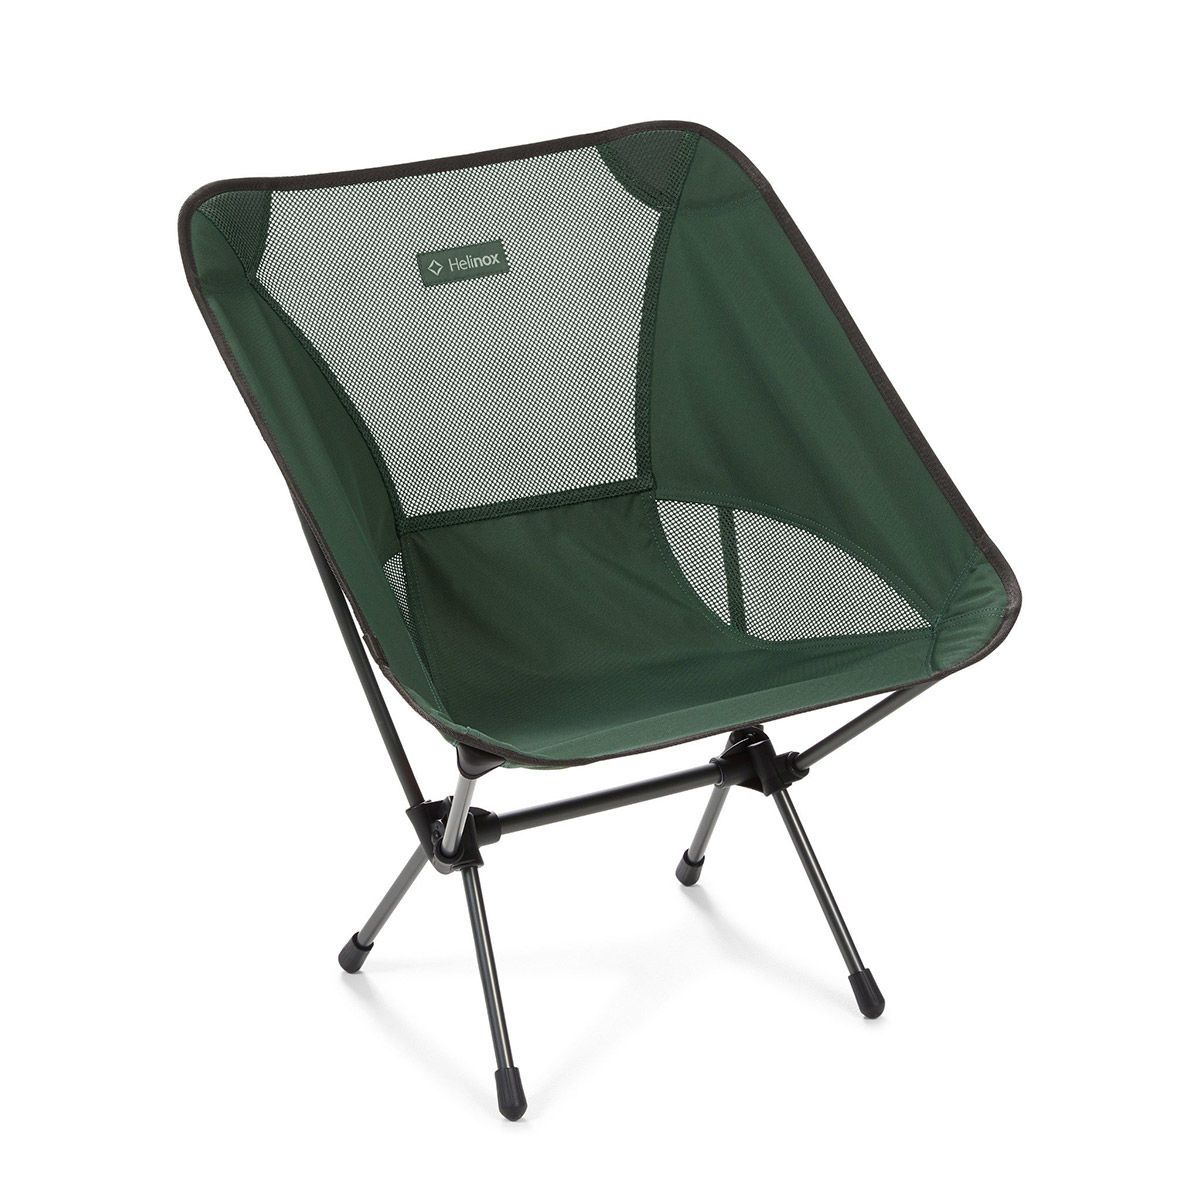 Chaise de camping Helinox Chair One - Forest green